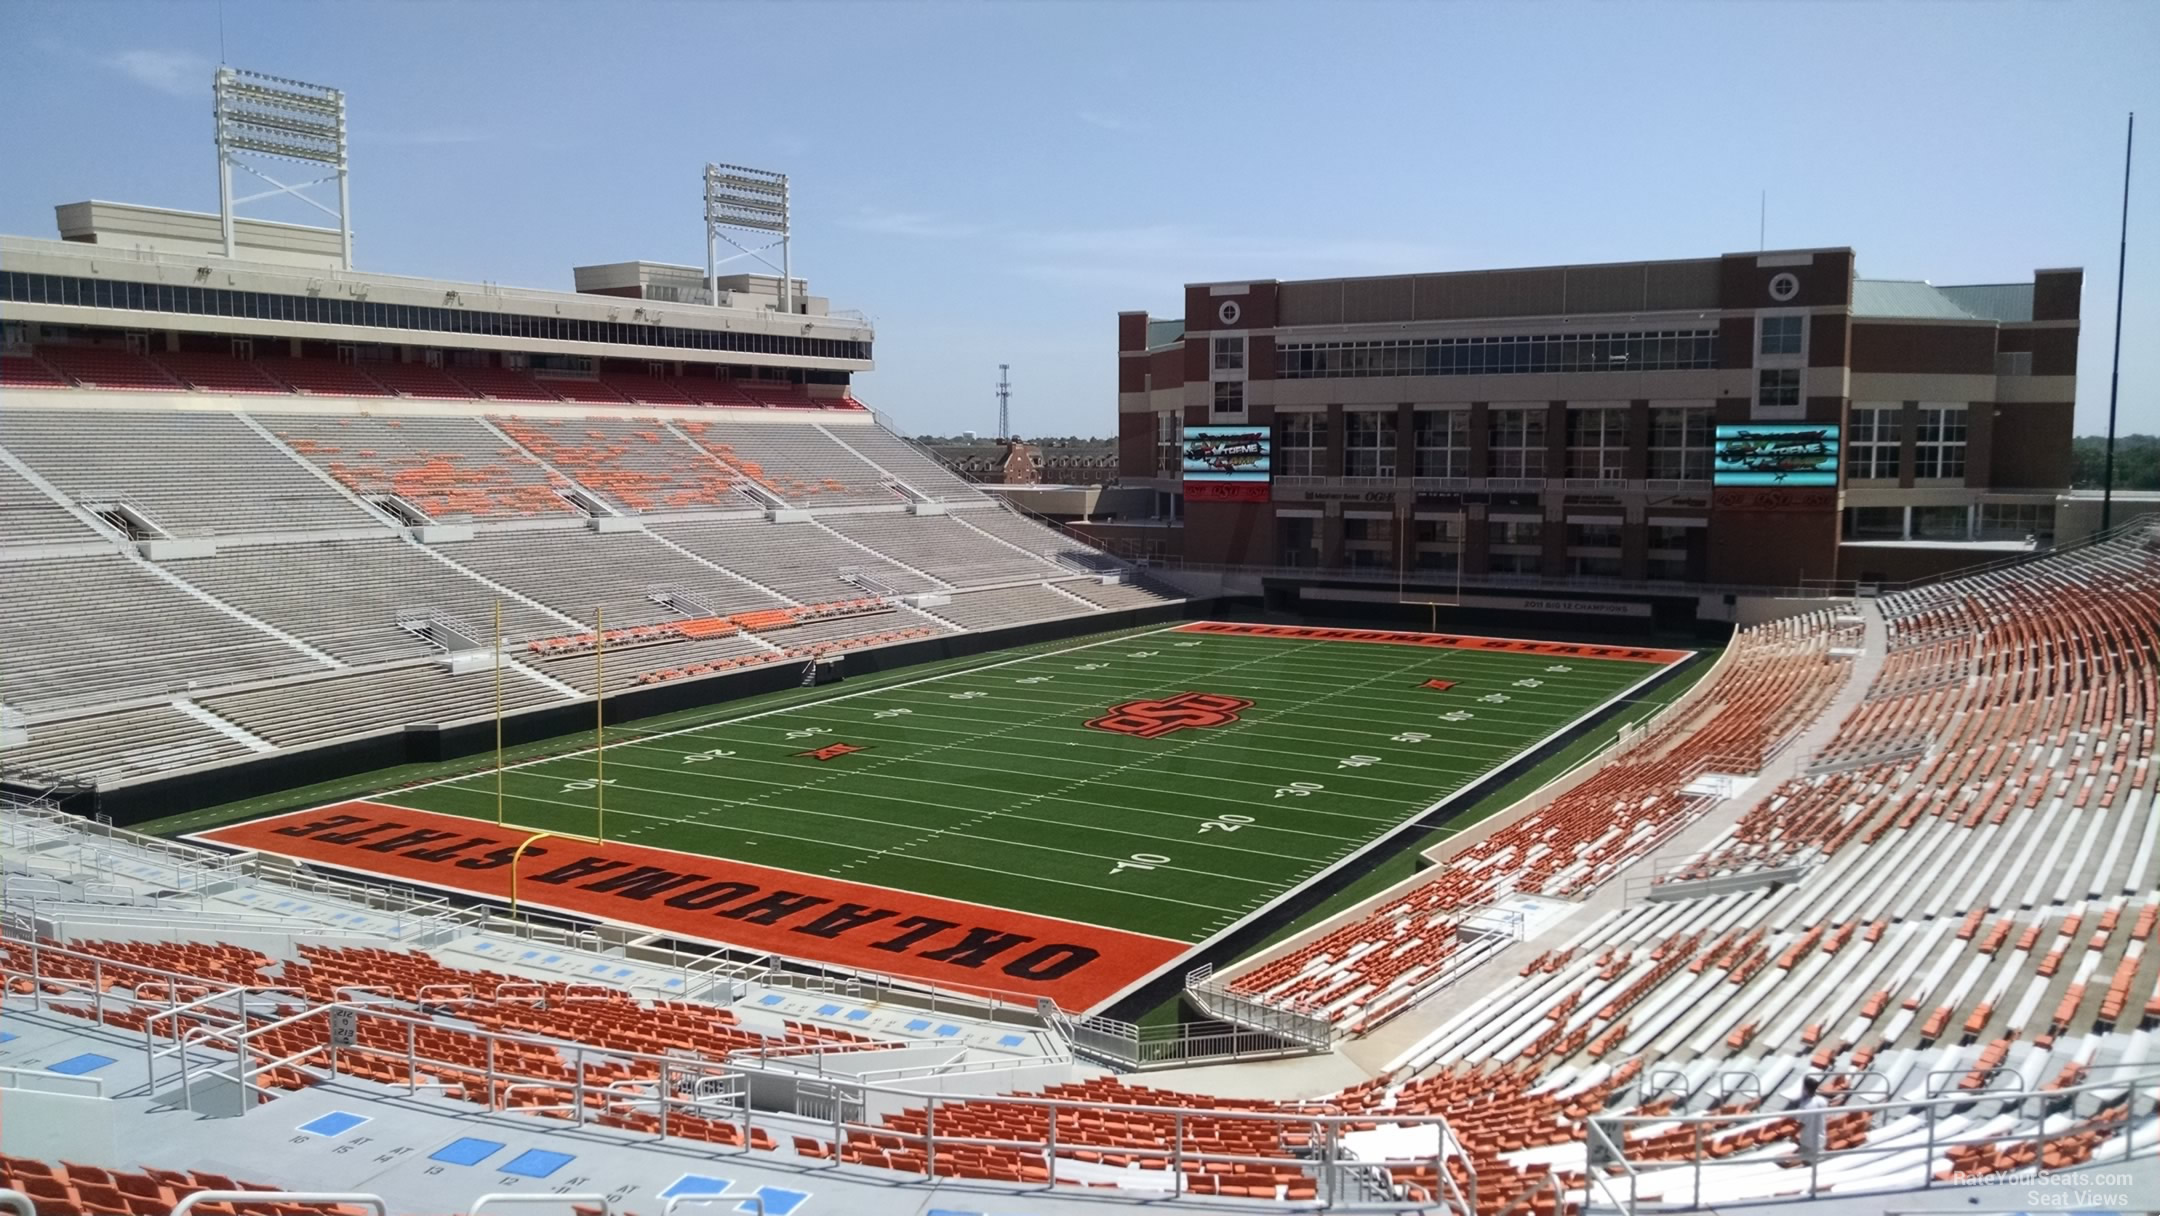 section 314, row 19 seat view  - boone pickens stadium